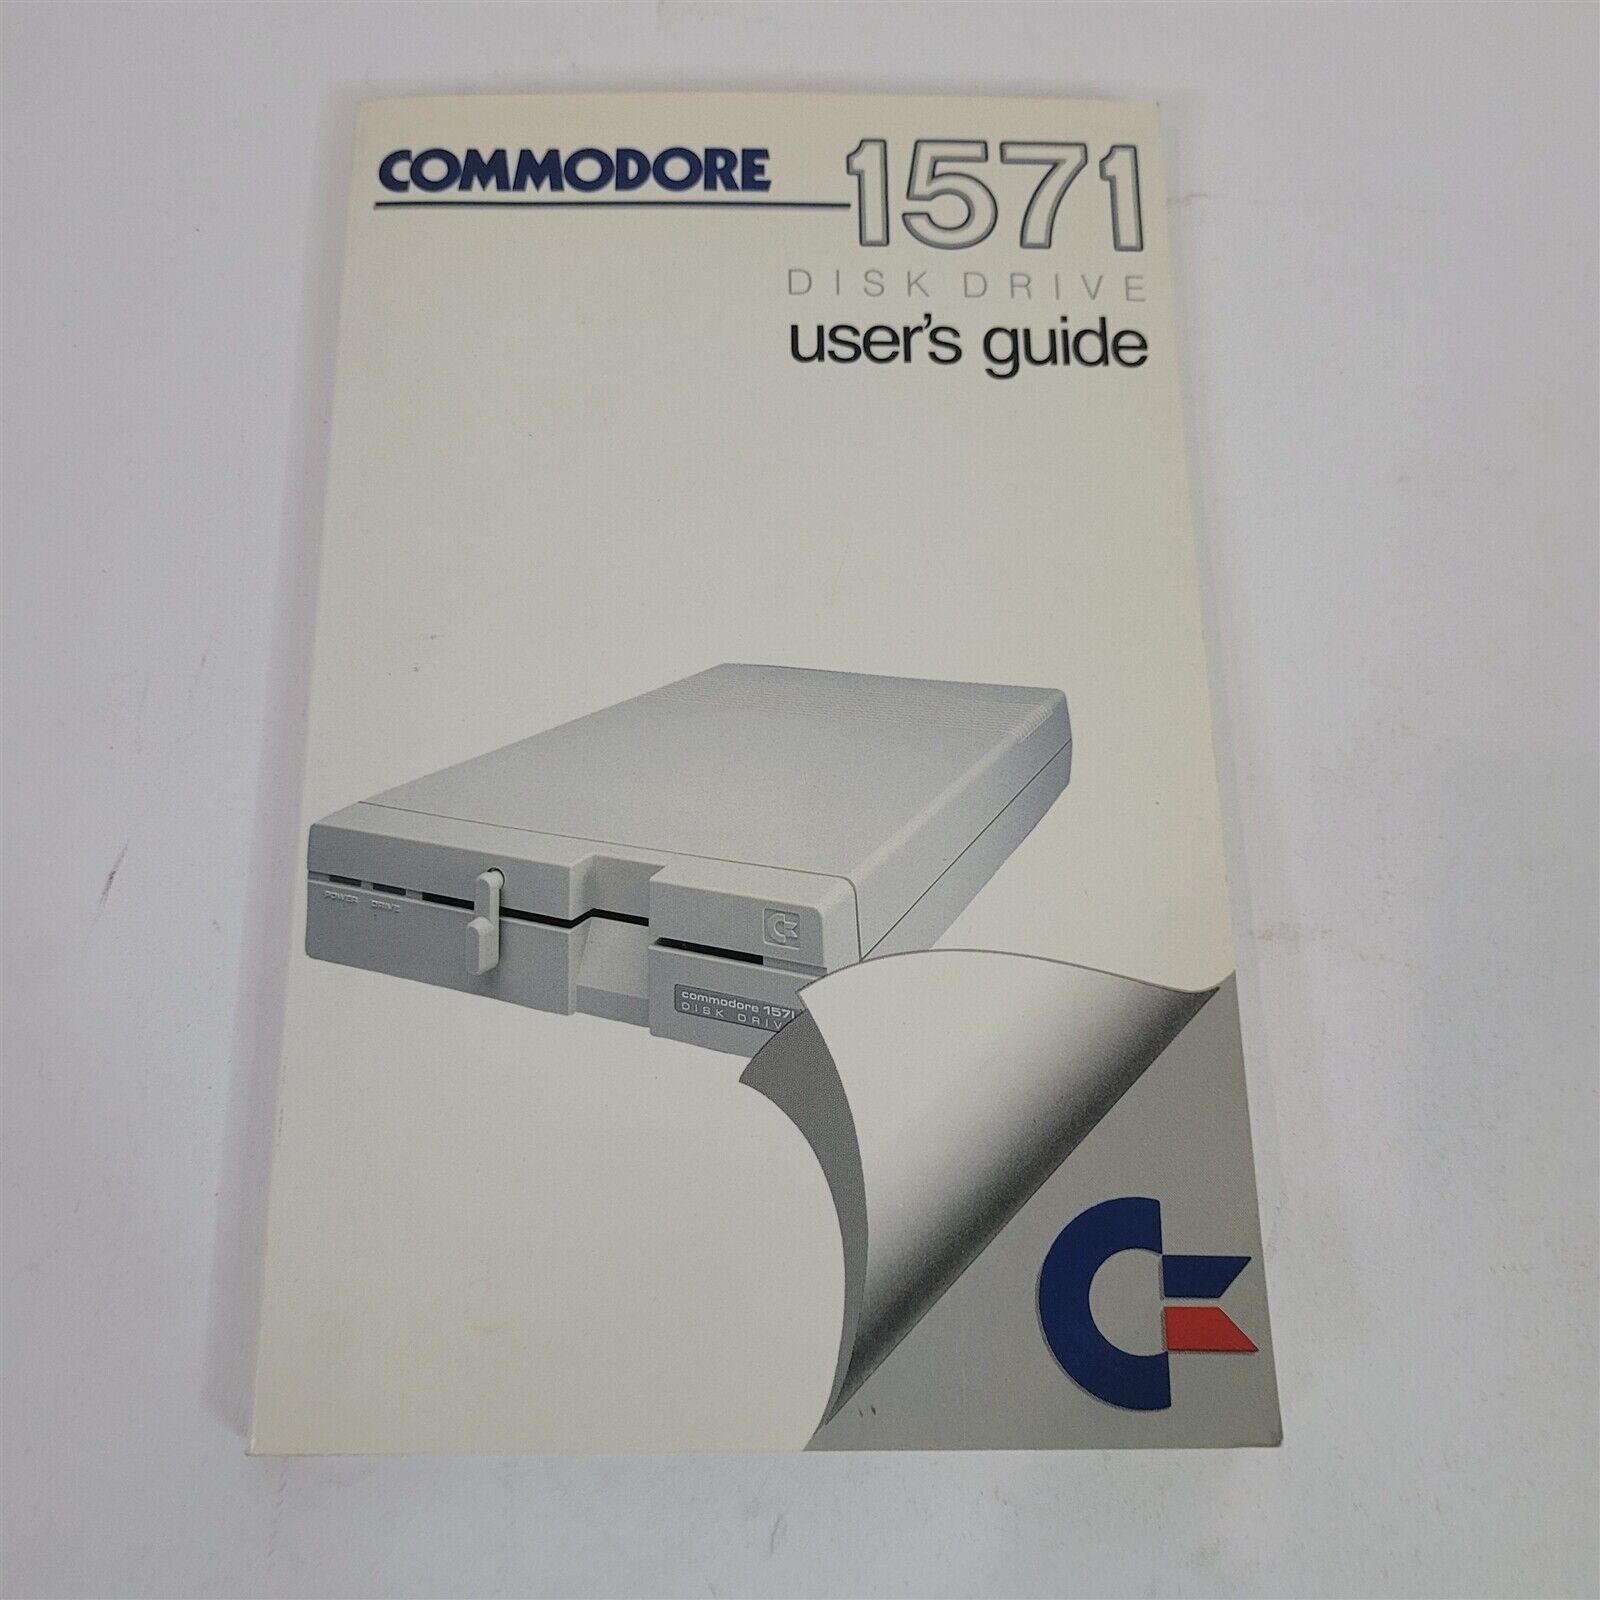 Vintage 1985 Original Commodore 1571 Floppy Disk Drive User's Guide